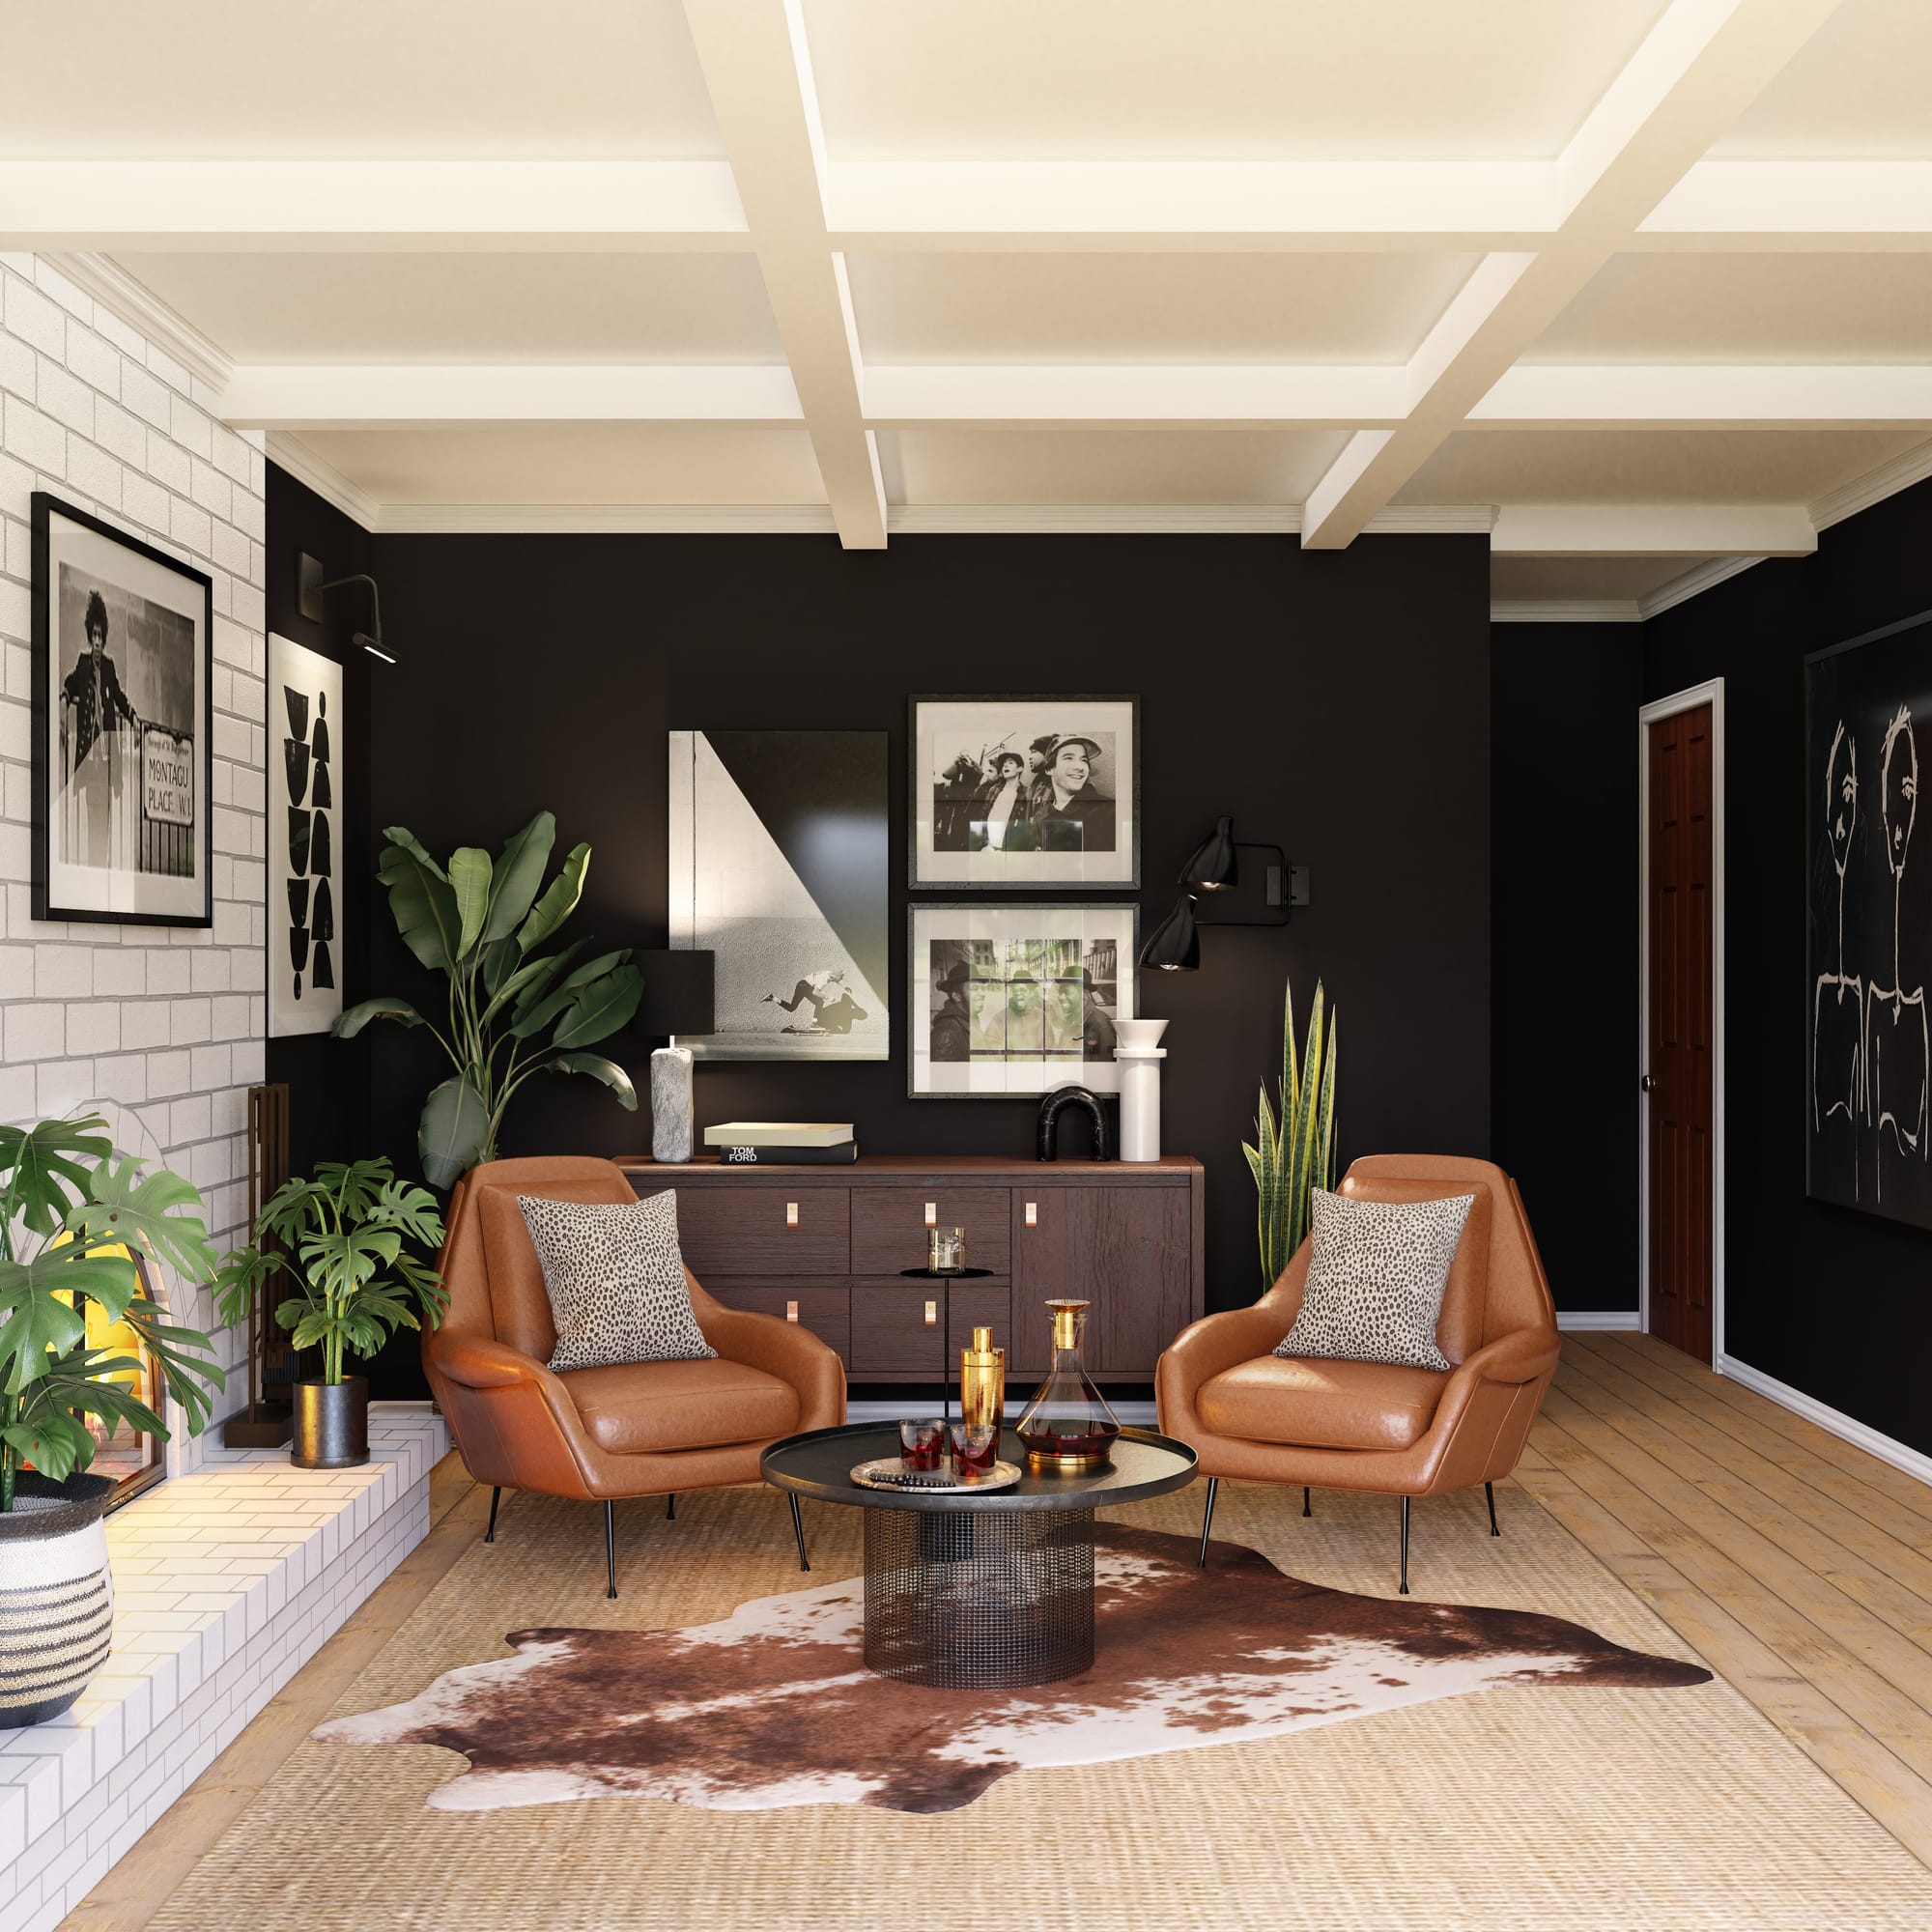 A living room with leather chairs and an accent wall